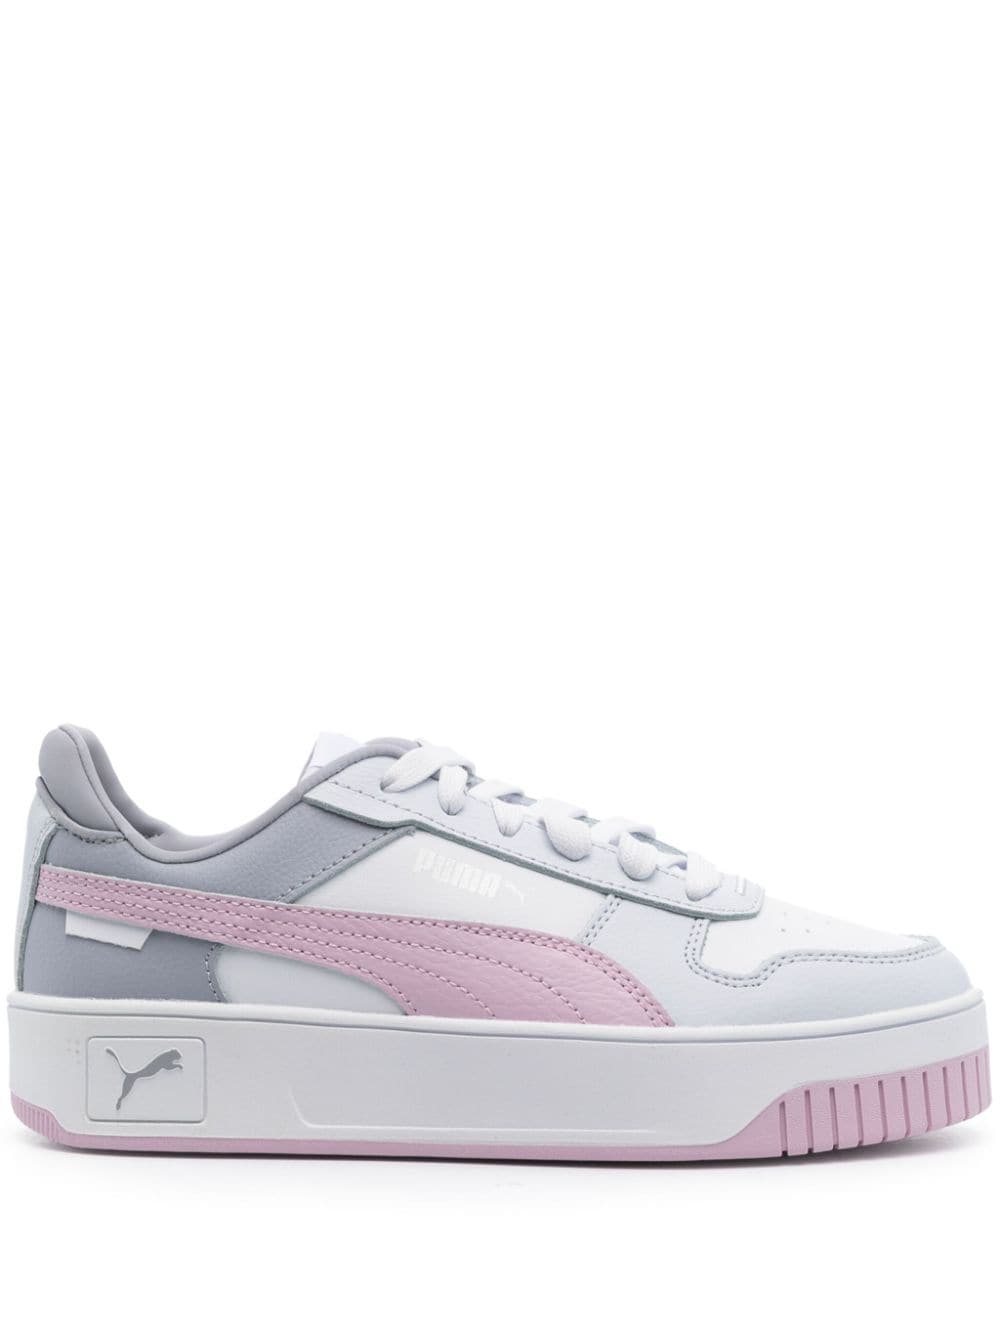 Puma Carina Street Leather Sneakers In White